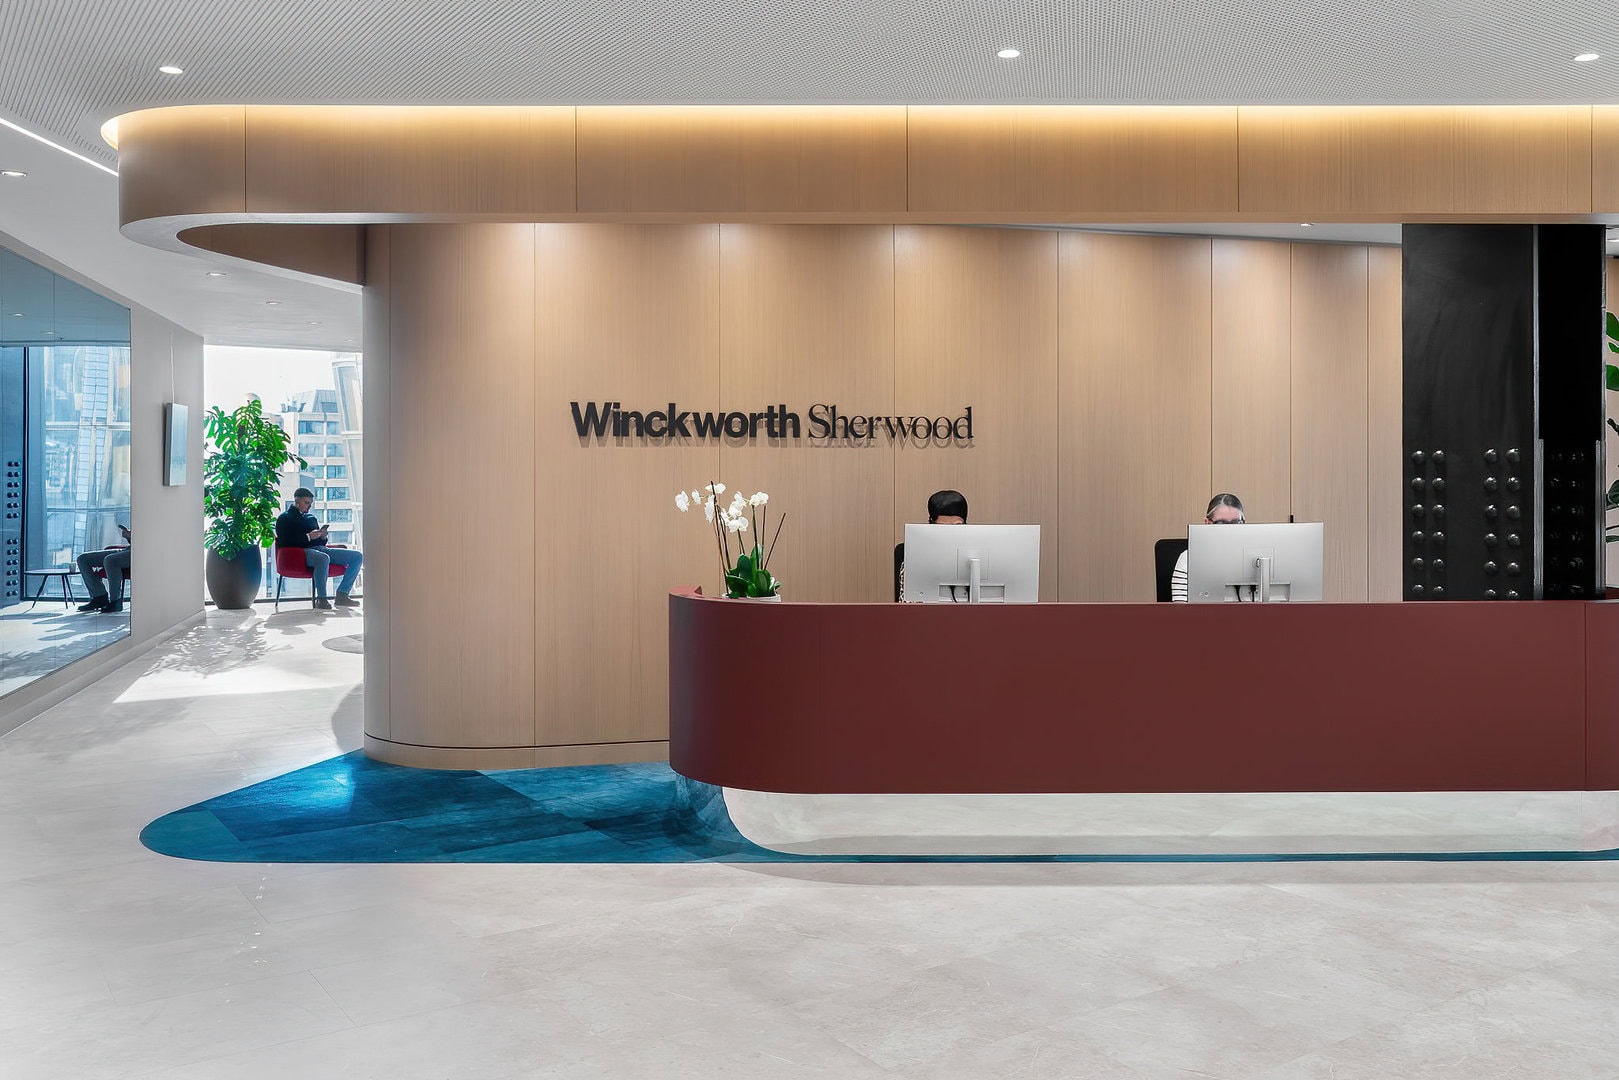 Reception area inside Winckworth Sherwood LLP offices by AIS.